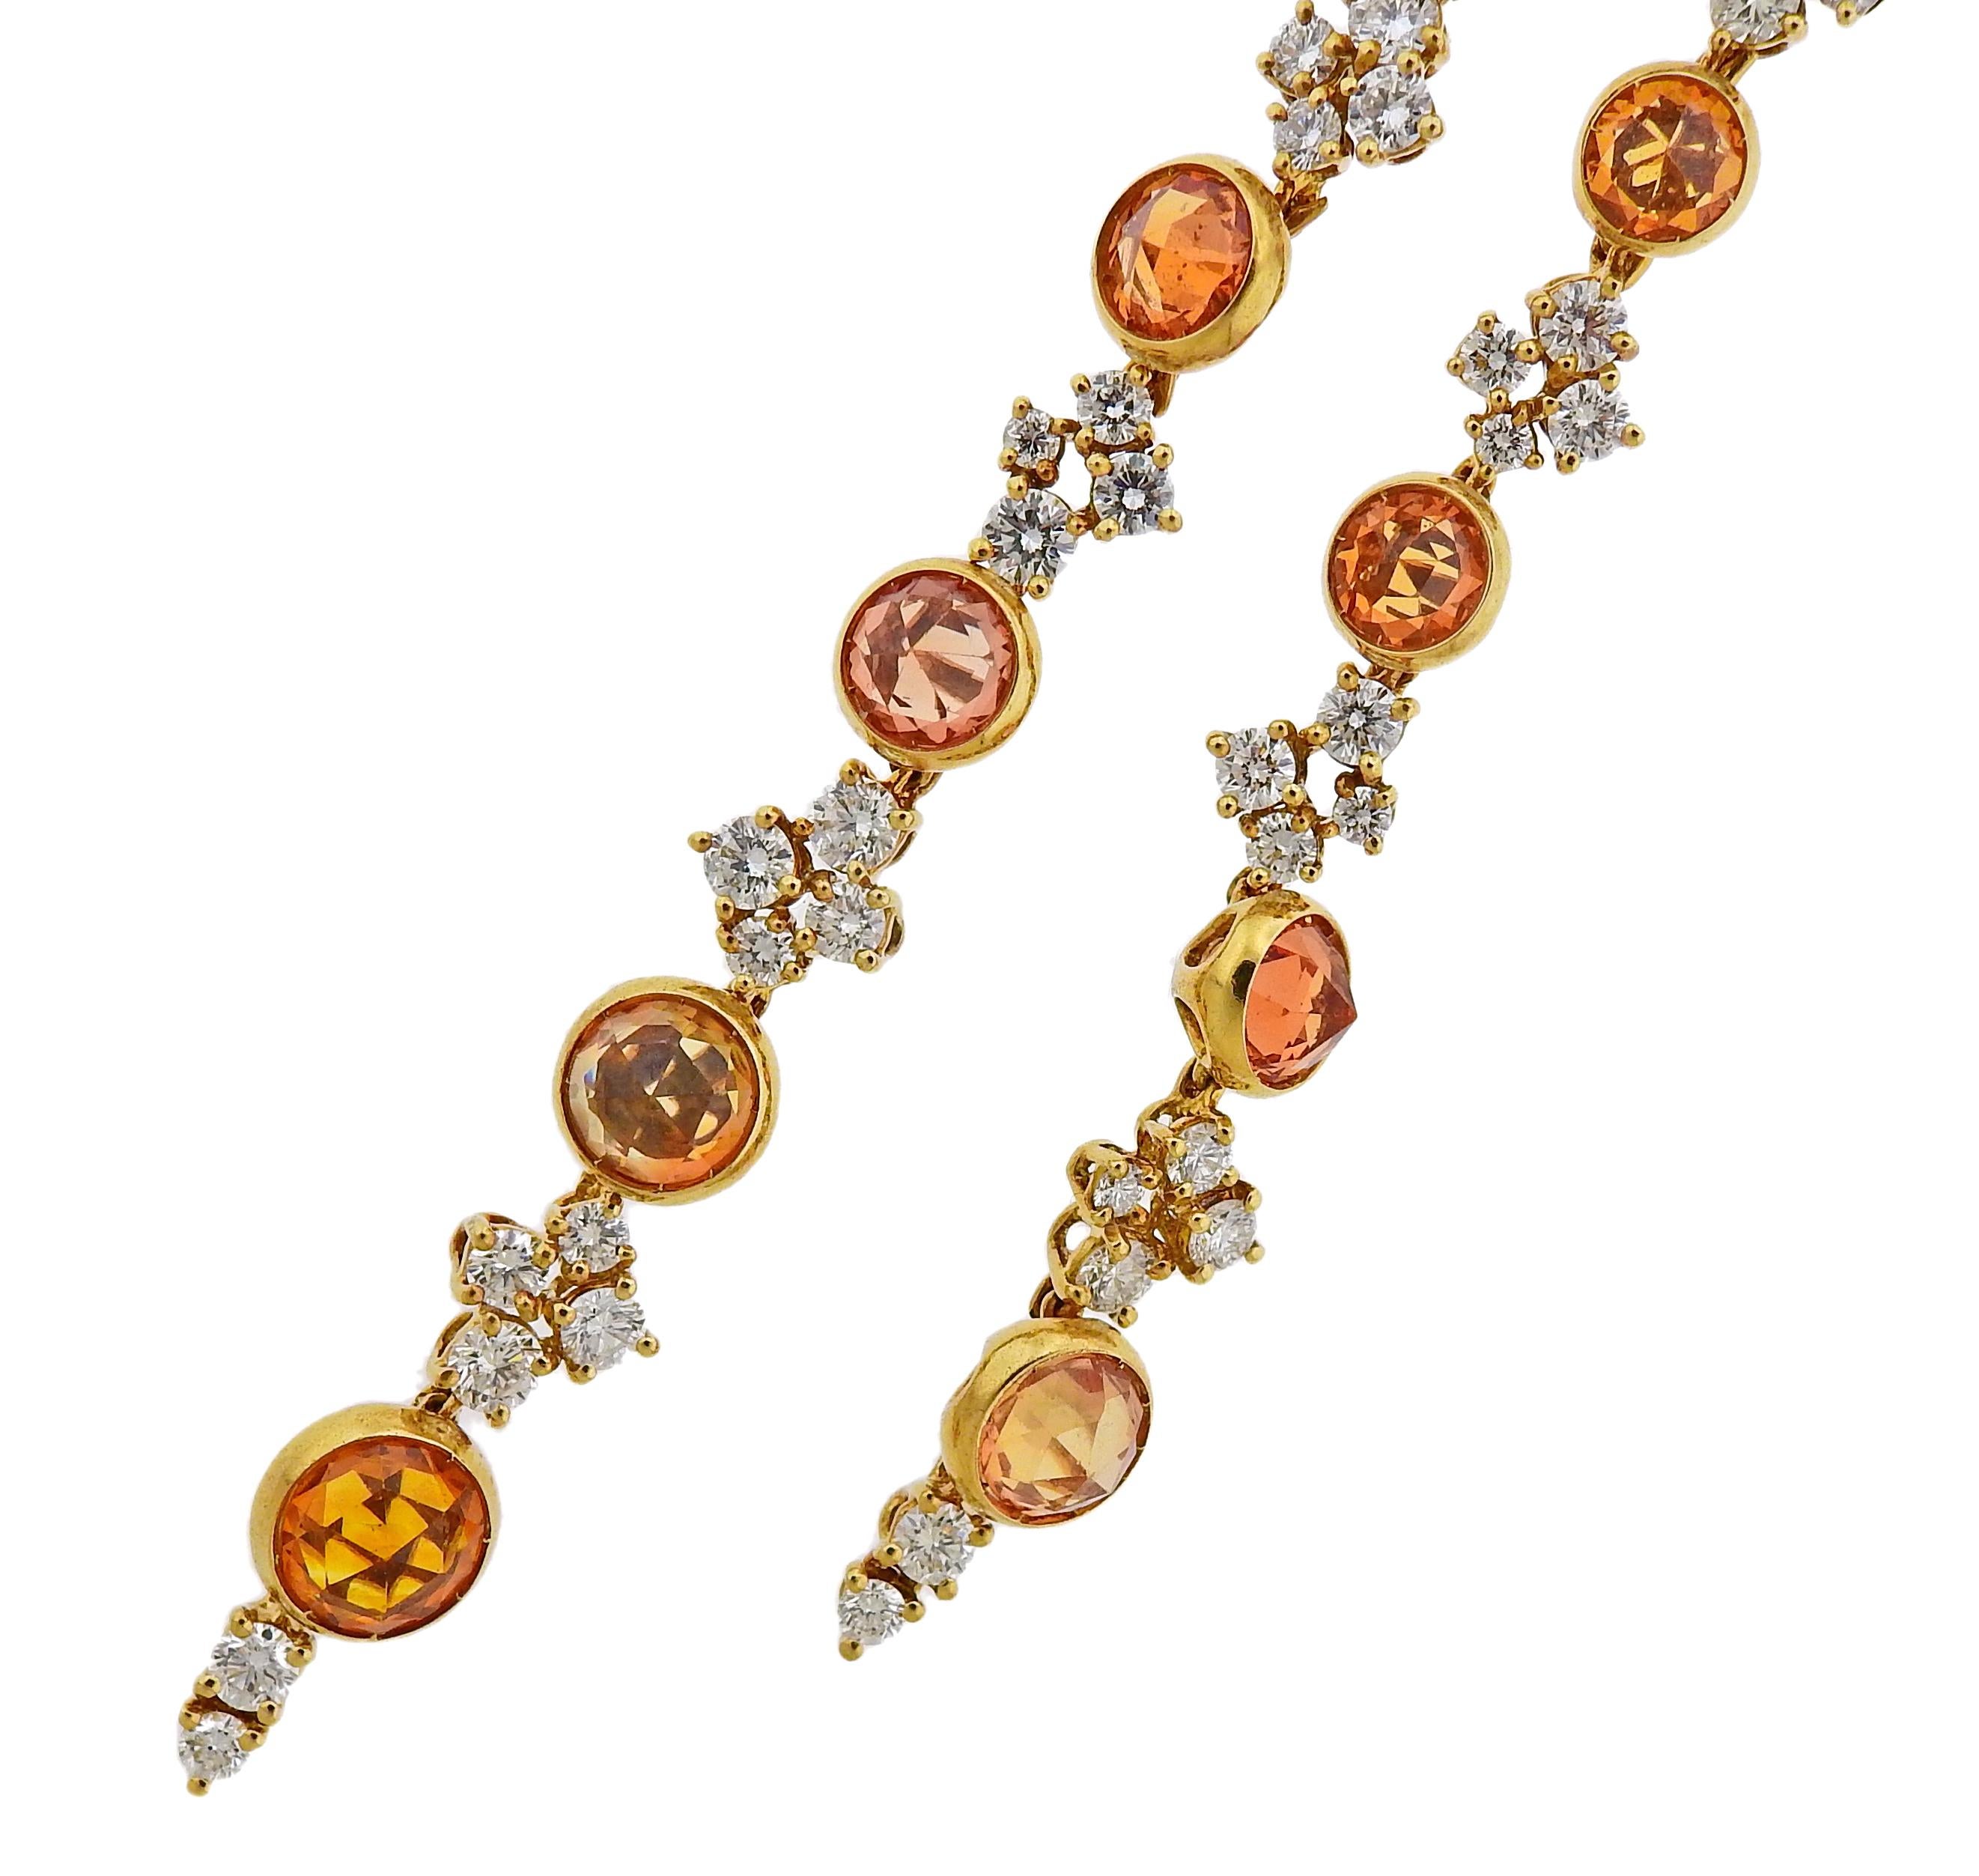 Exquisite Porrati 18k gold necklace, set with approx. 7.53ctw in G/VS diamonds and multi color sapphires. Necklace is 16.25